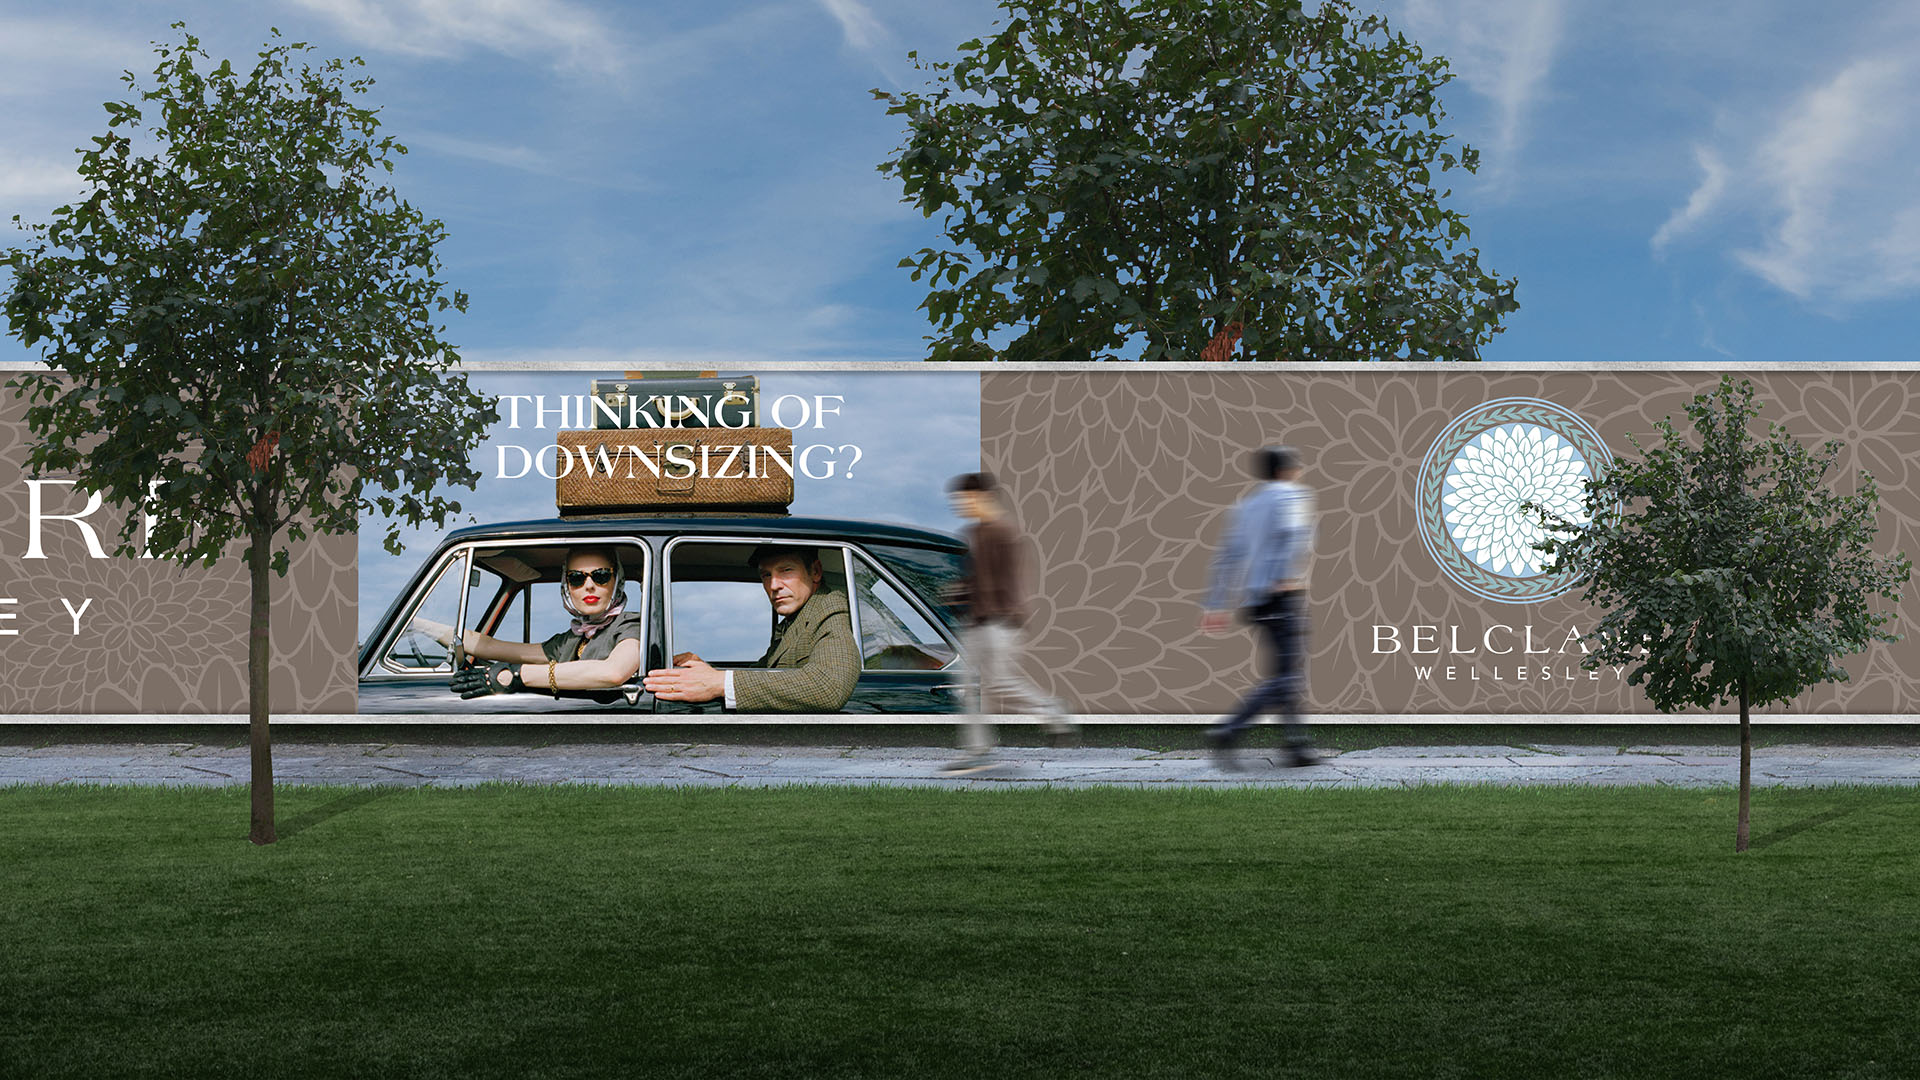 Belclare wellesley identity with environmental signage